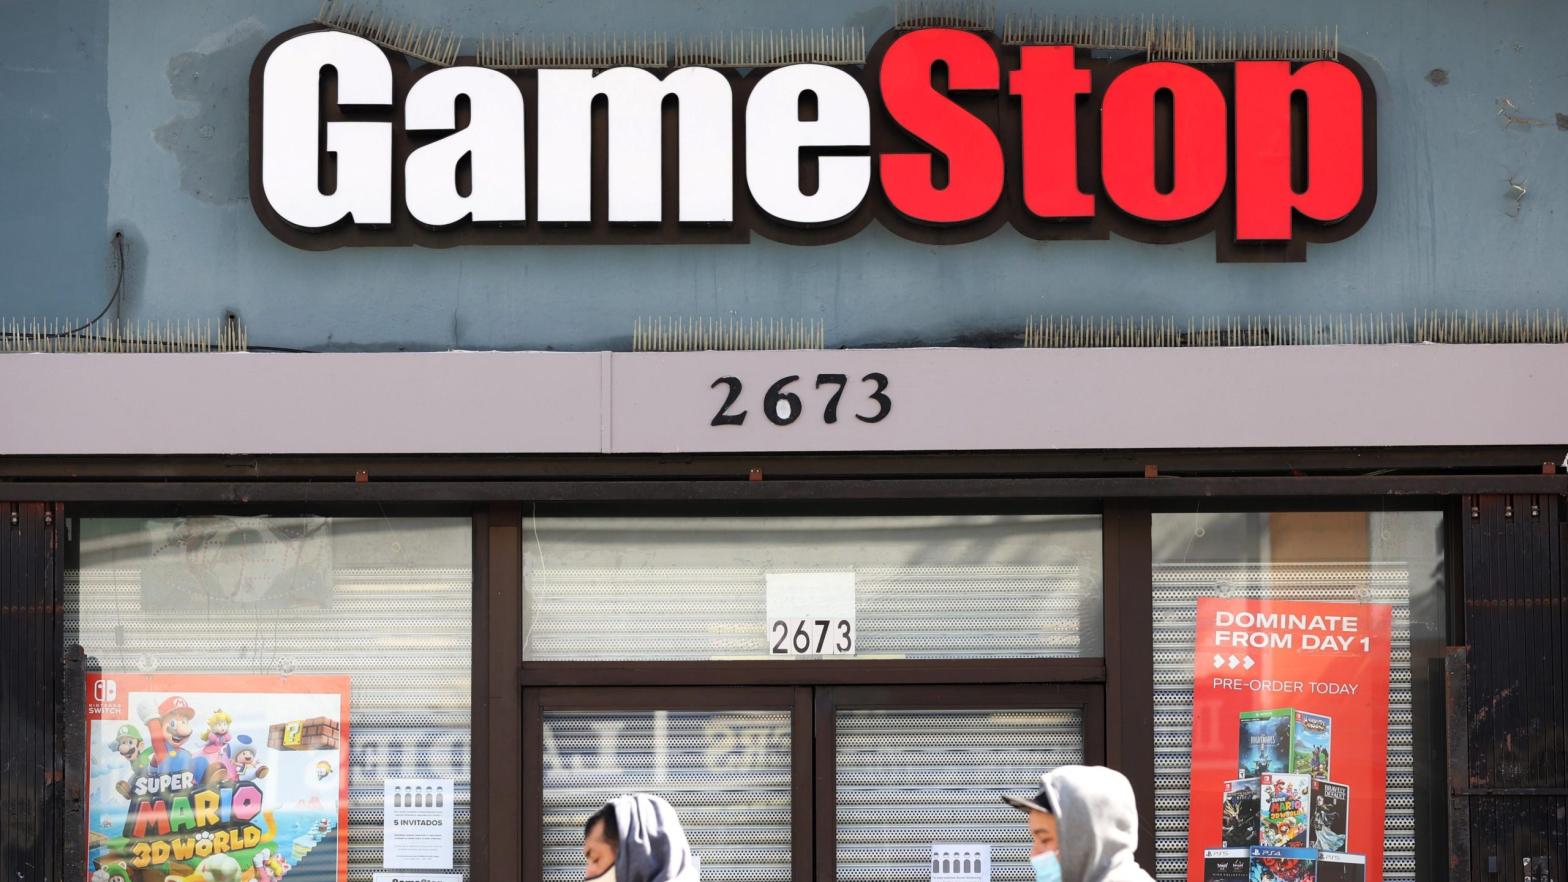 Pedestrians stroll by a GameStop store in March 2021 in San Francisco, California. (Photo: Justin Sullivan, Getty Images)